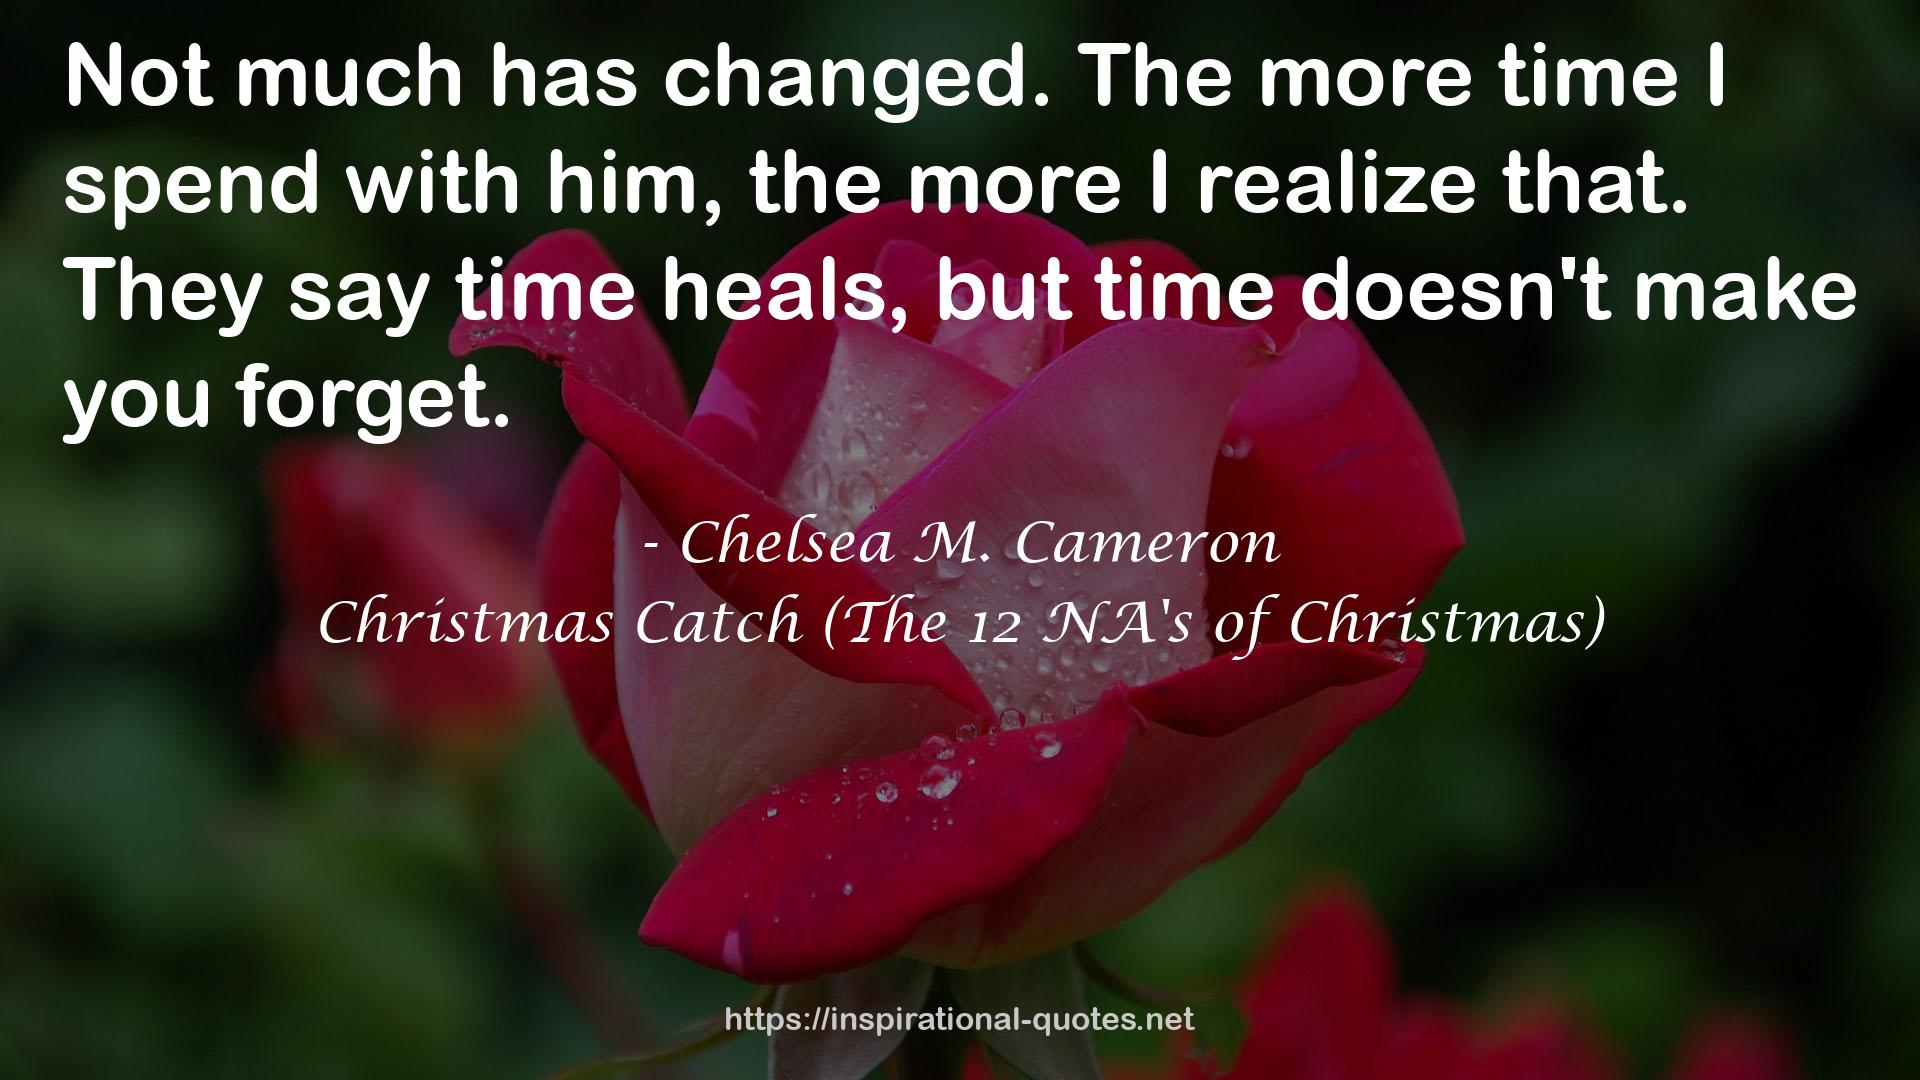 Christmas Catch (The 12 NA's of Christmas) QUOTES